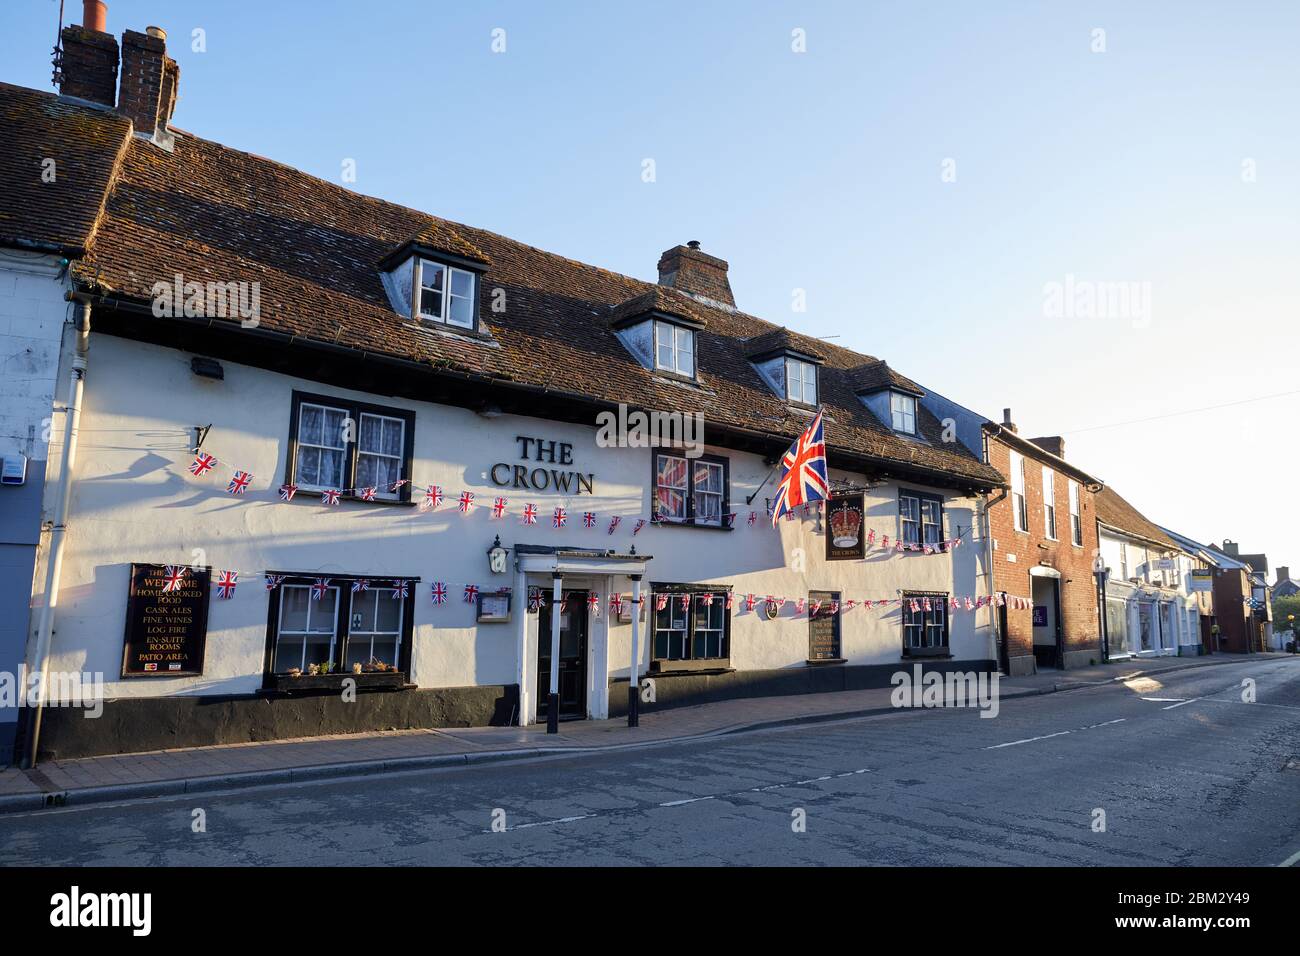 Fordingbridge, UK. - May 6 2020: Despite being closed during the coronavirus lockdown The Crown pub in Fordingbridge, Hampshire is decorated in bunting for VE Day 75. Stock Photo